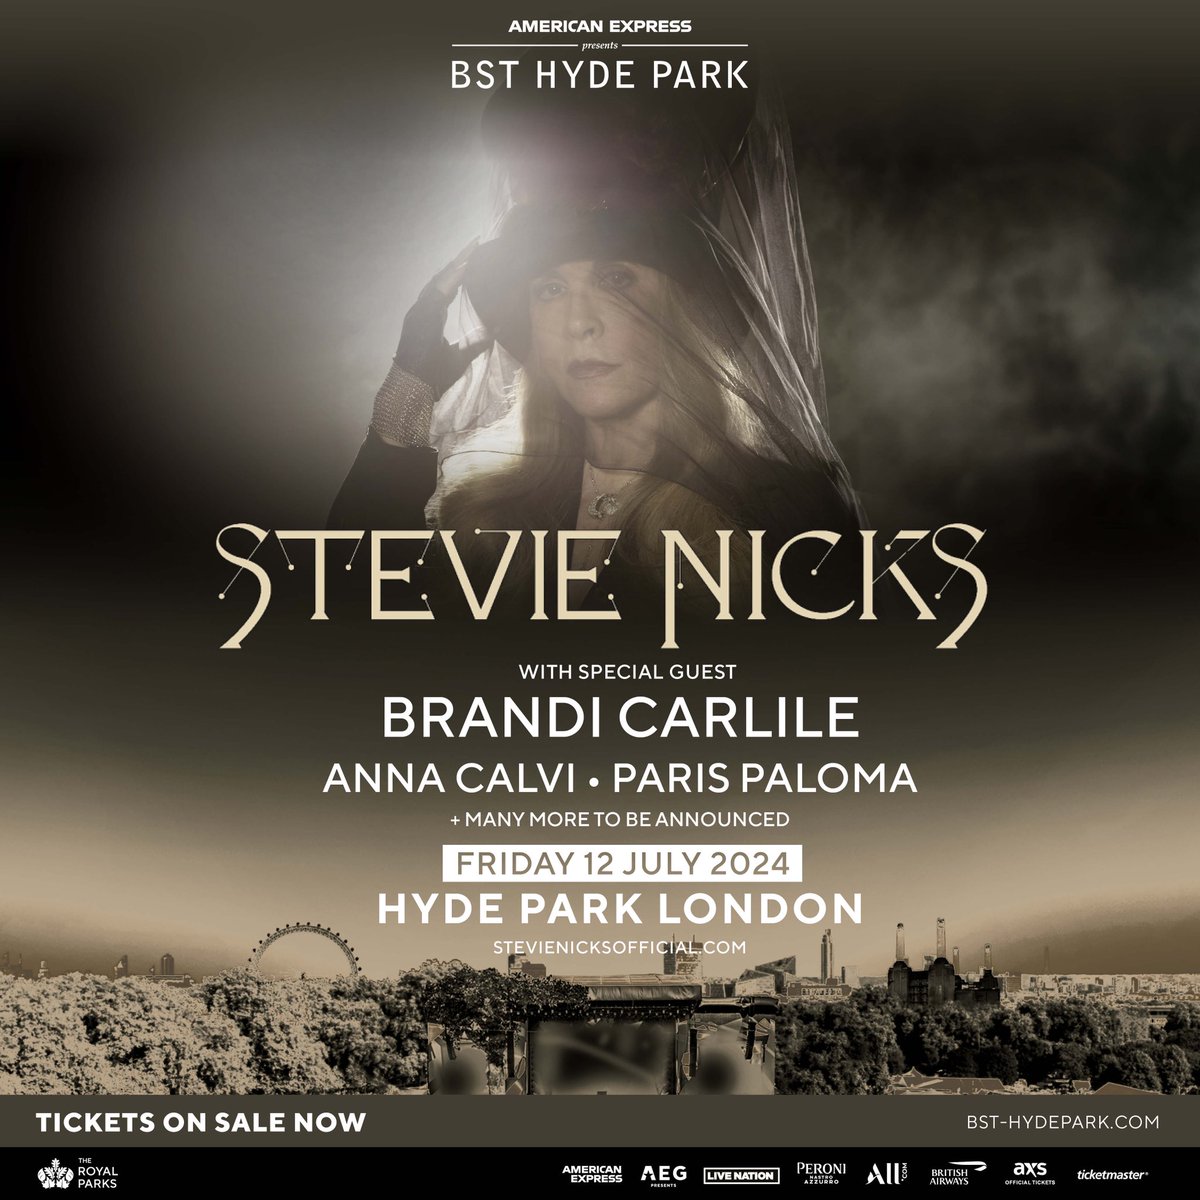 Just announced: @brandicarlile will be special guest to @StevieNicks on her @BSTHydePark show on the 12th July!